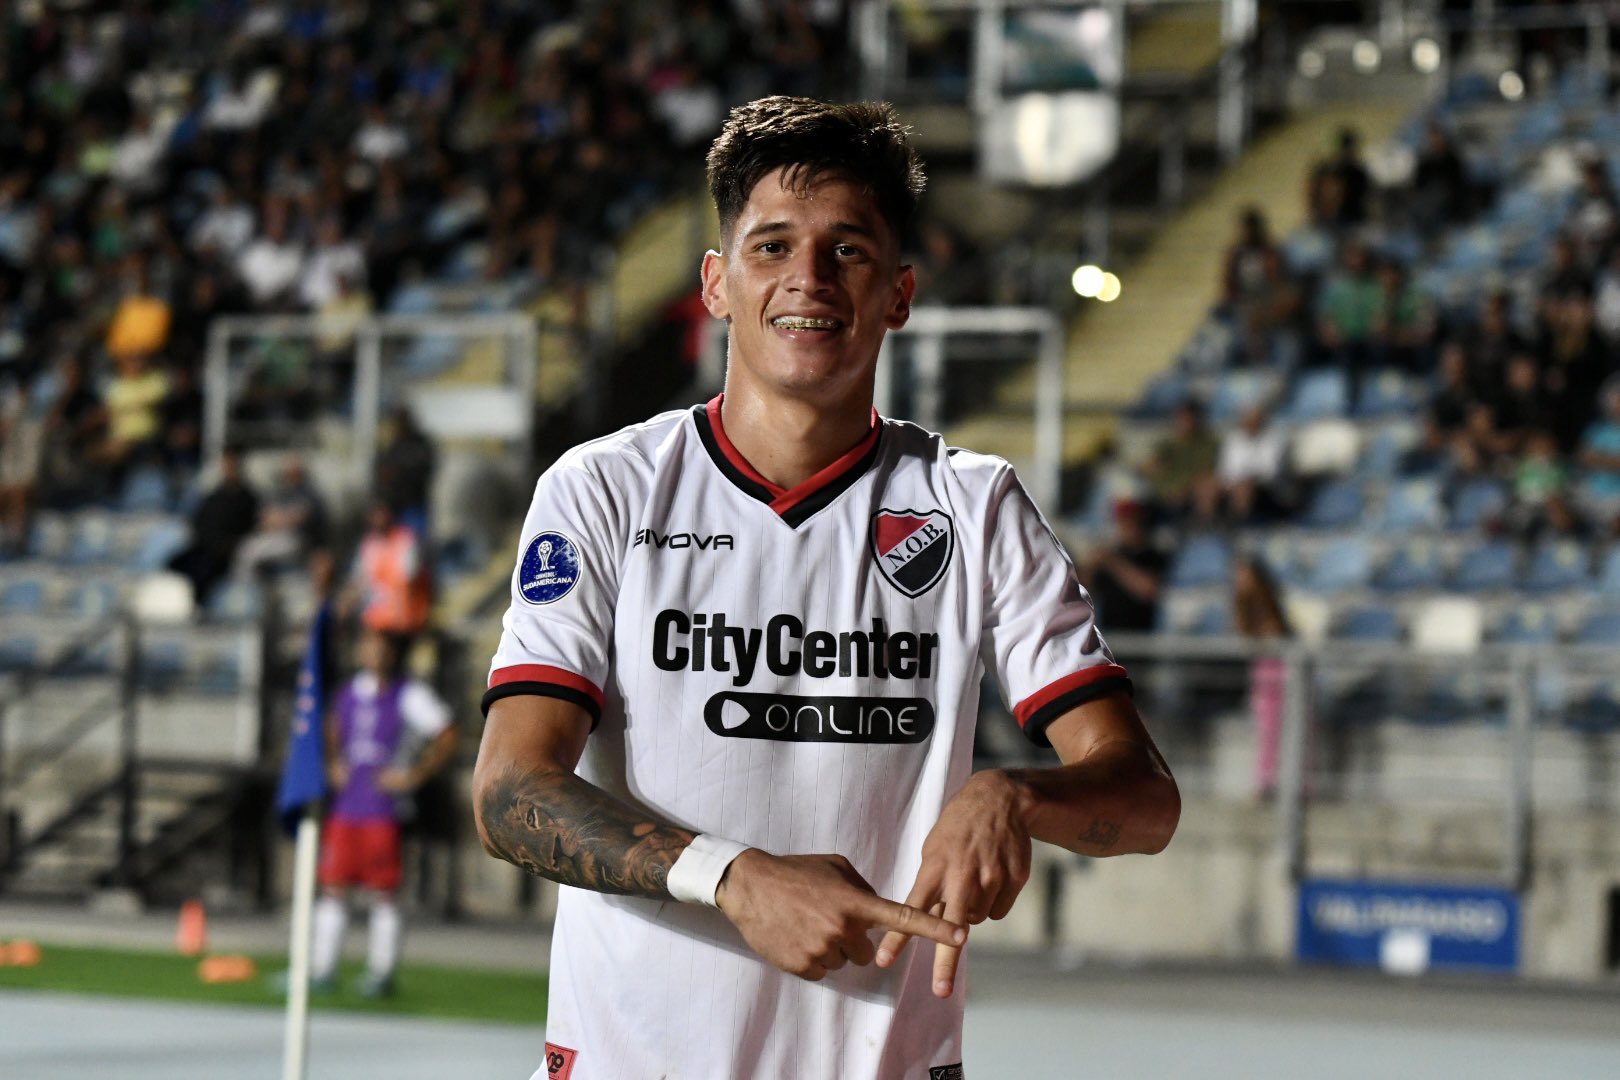 Fonte immagine: Twitter ufficiale Newell’s Old Boys